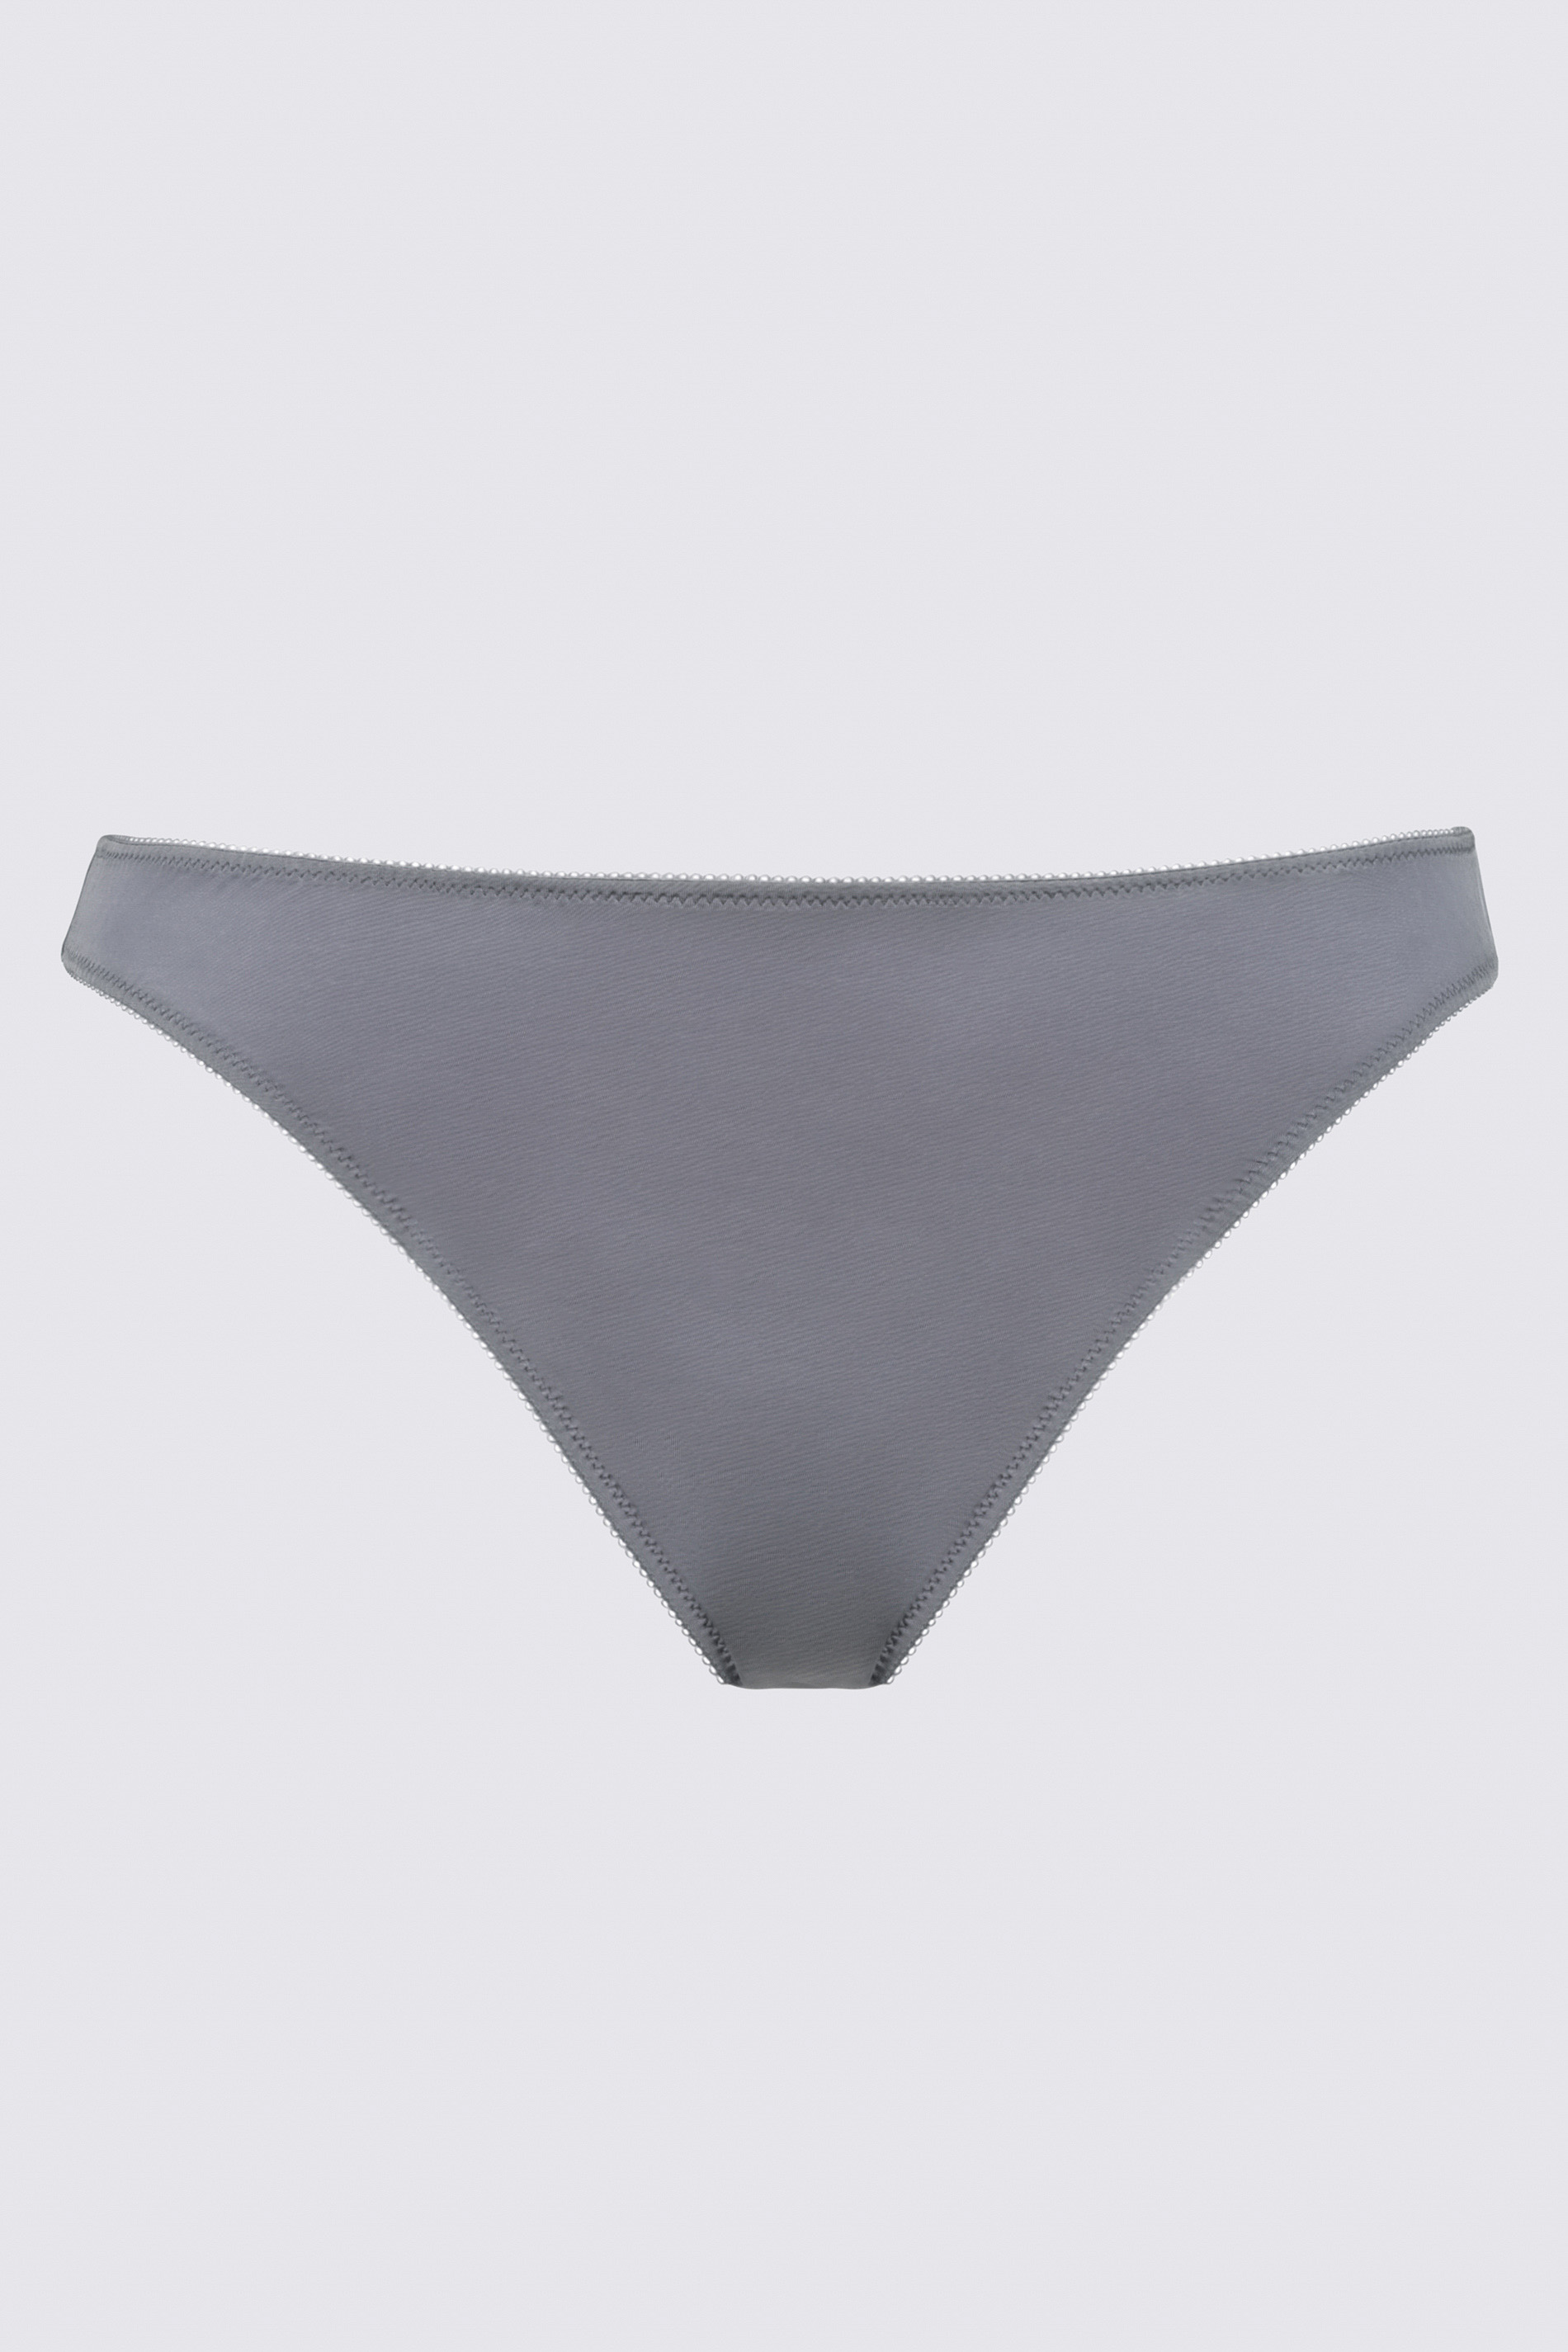 Retro jazz briefs Lovely Grey Serie Poetry Classy Cut Out | mey®